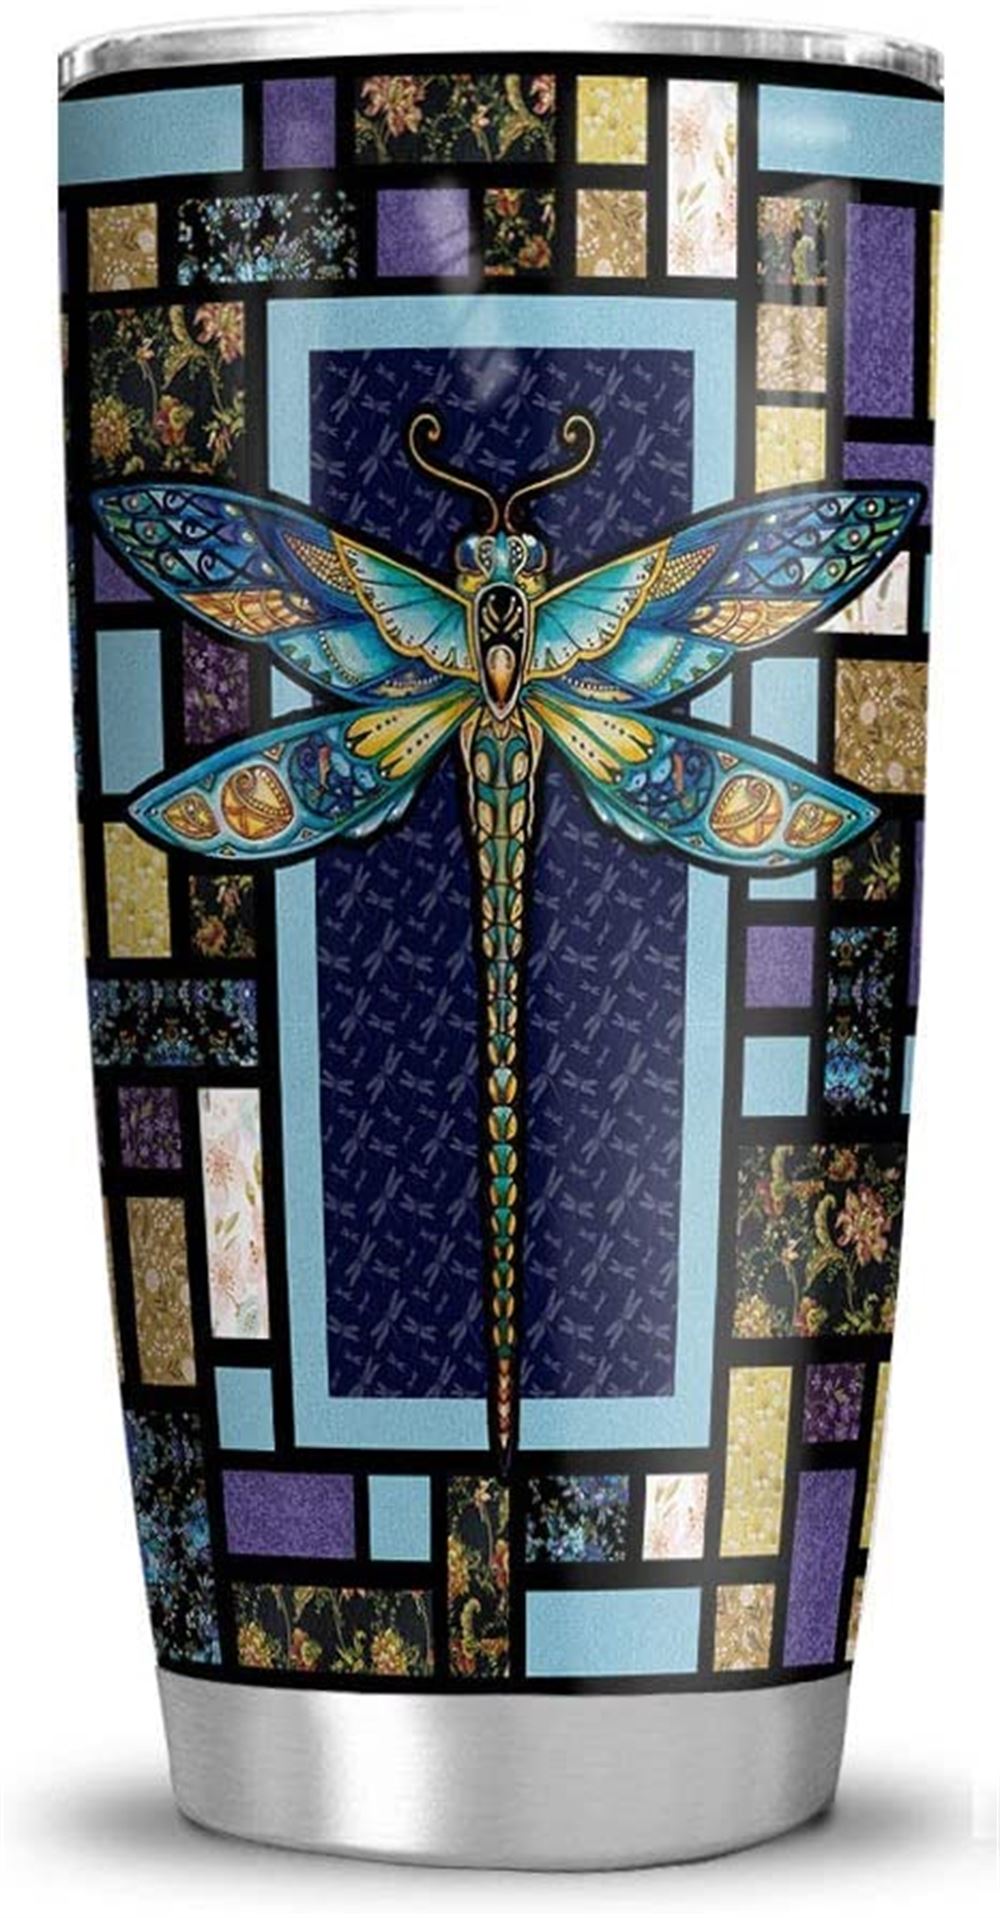 20 Oz Tumbler 20oz Dragonfly Mosaic Style Decorative Tumbler Cup With Lid Double Wall Vacuum Sporty